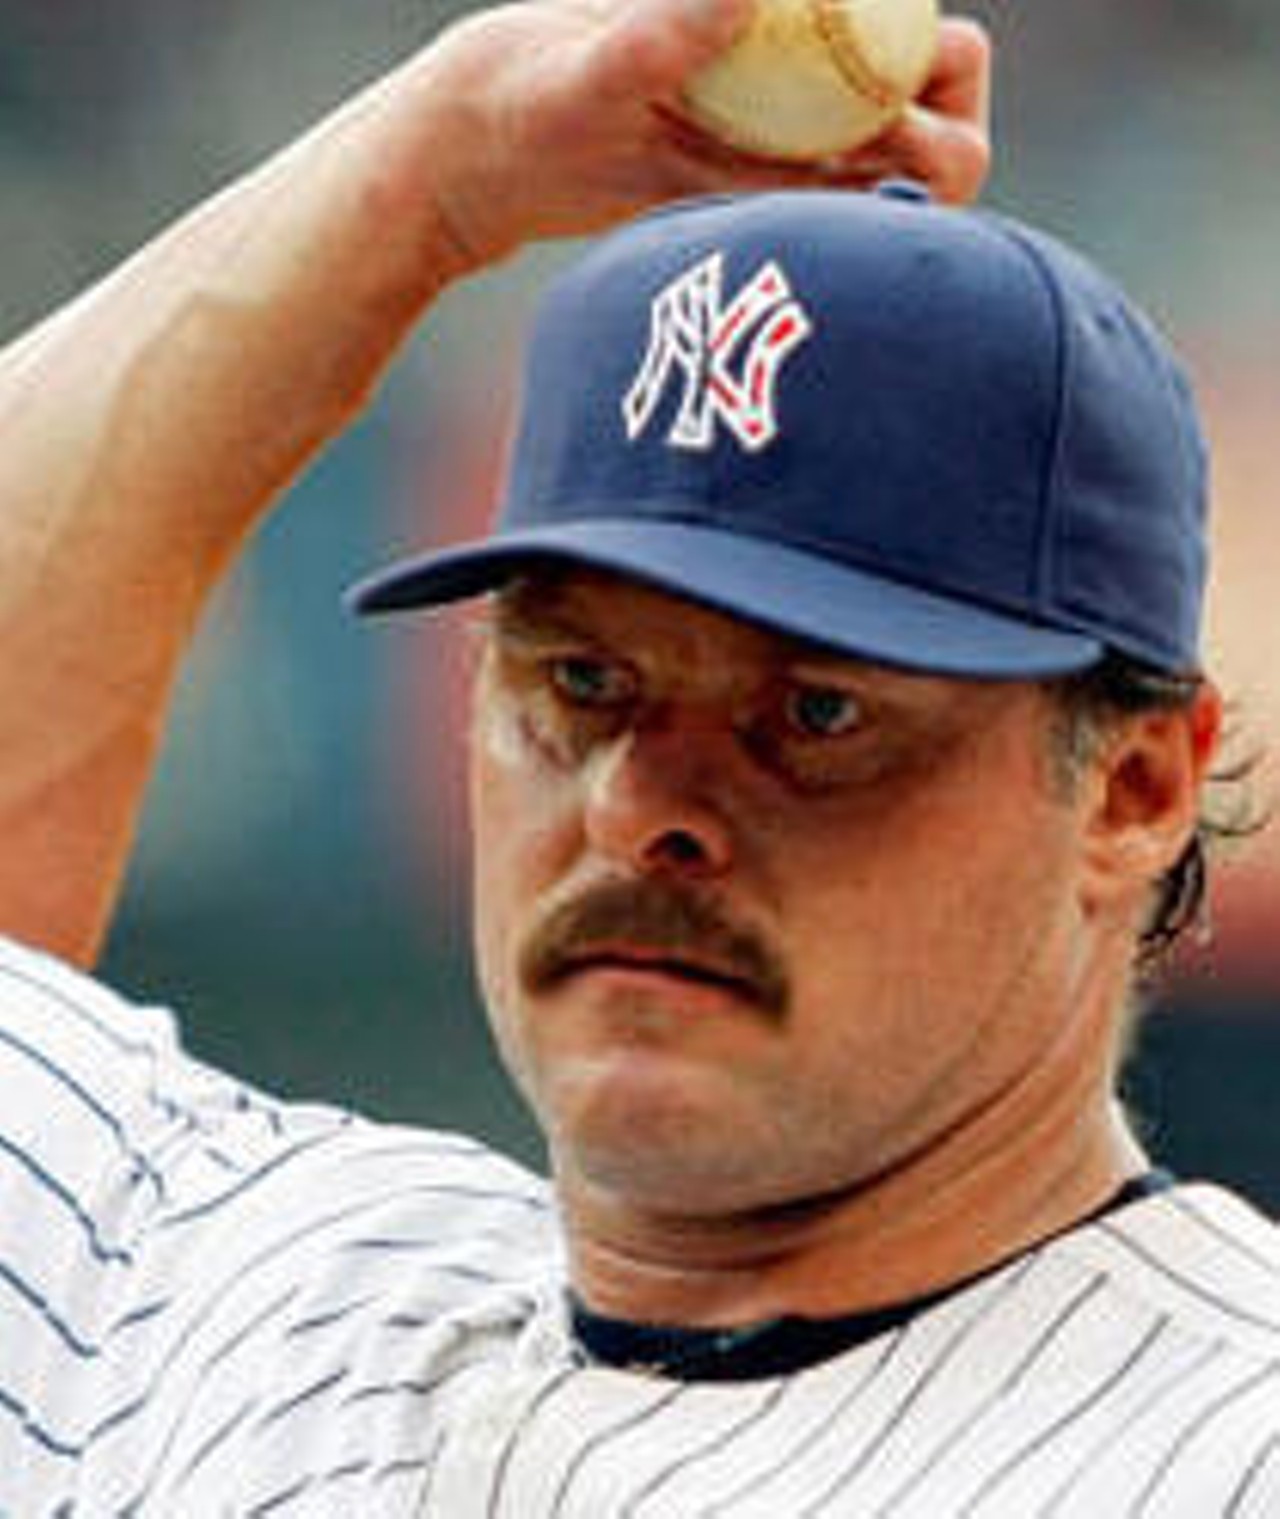 8. Jason Giambi
I know what you're thinking. You're thinking to yourself, "That's one of the worst mustaches I've ever seen!" 
You're absolutely right. And therein, my short-sighted friends, lays the beauty of this 'stache. 
You know why this is a great mustache? Because Jason Giambi did that to himself on purpose. Give that a second to sink in. See, something like that doesn't just happen by accident. You have to try, and try hard, to produce a mustache that shitty. So no, it isn't some sort of awful mistake that Jason ended up looking like an extra from the Beastie Boys' "Sabotage" video. He meant that shit. If you can't handle it, that's your problem, pal.